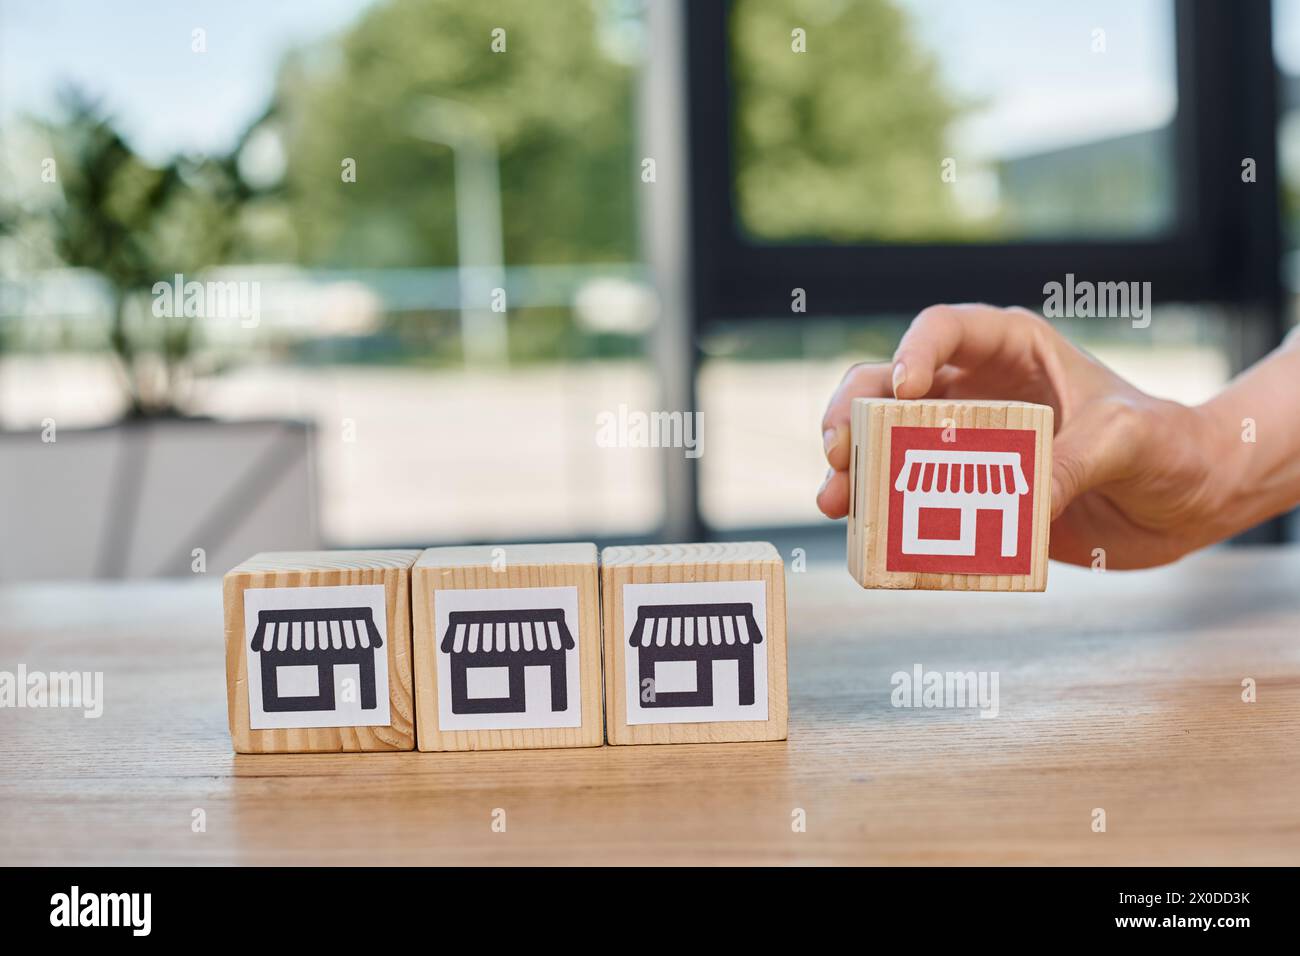 A businesswoman joyfully arranges wooden blocks engraved with symbols, exploring the art and culture they represent. Stock Photo